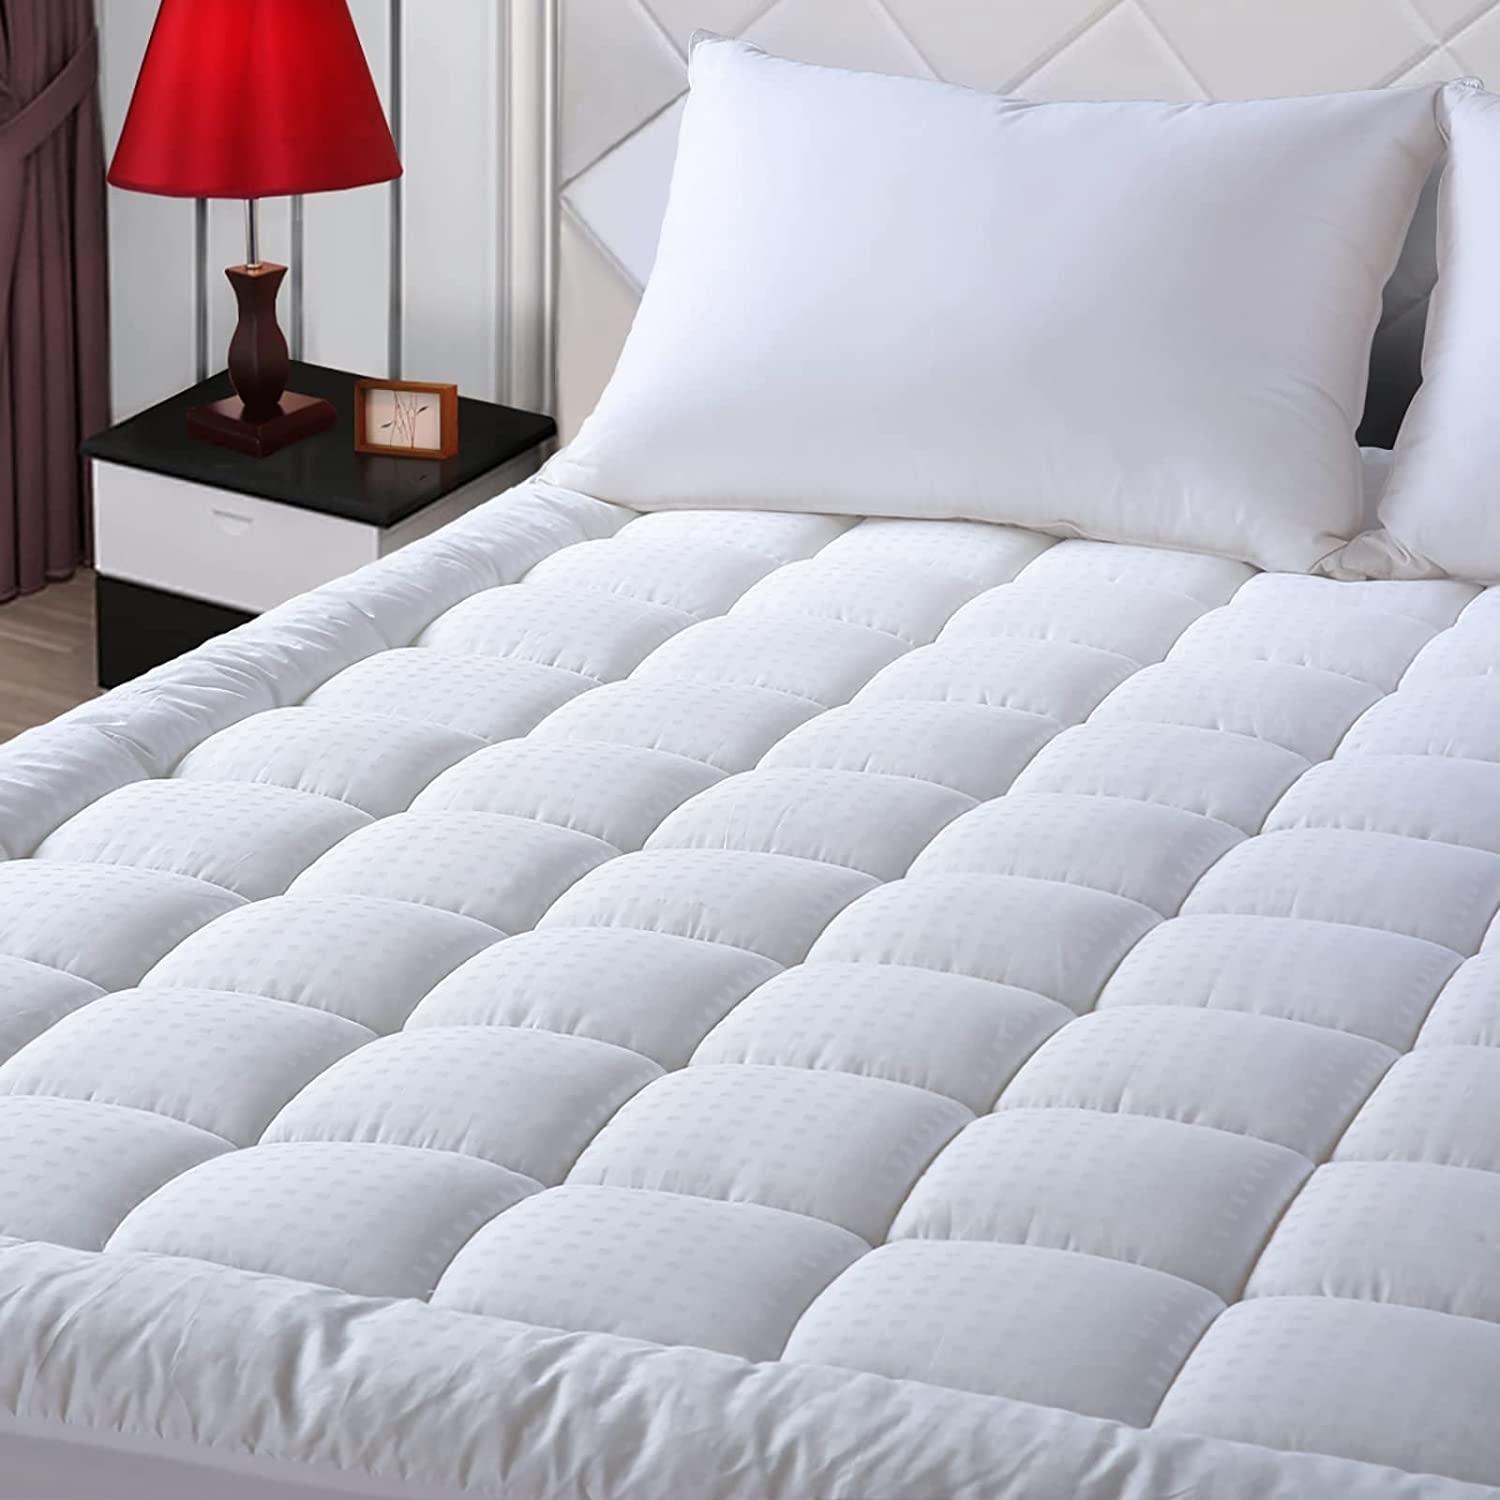 White quilted mattress cover on top of a bed